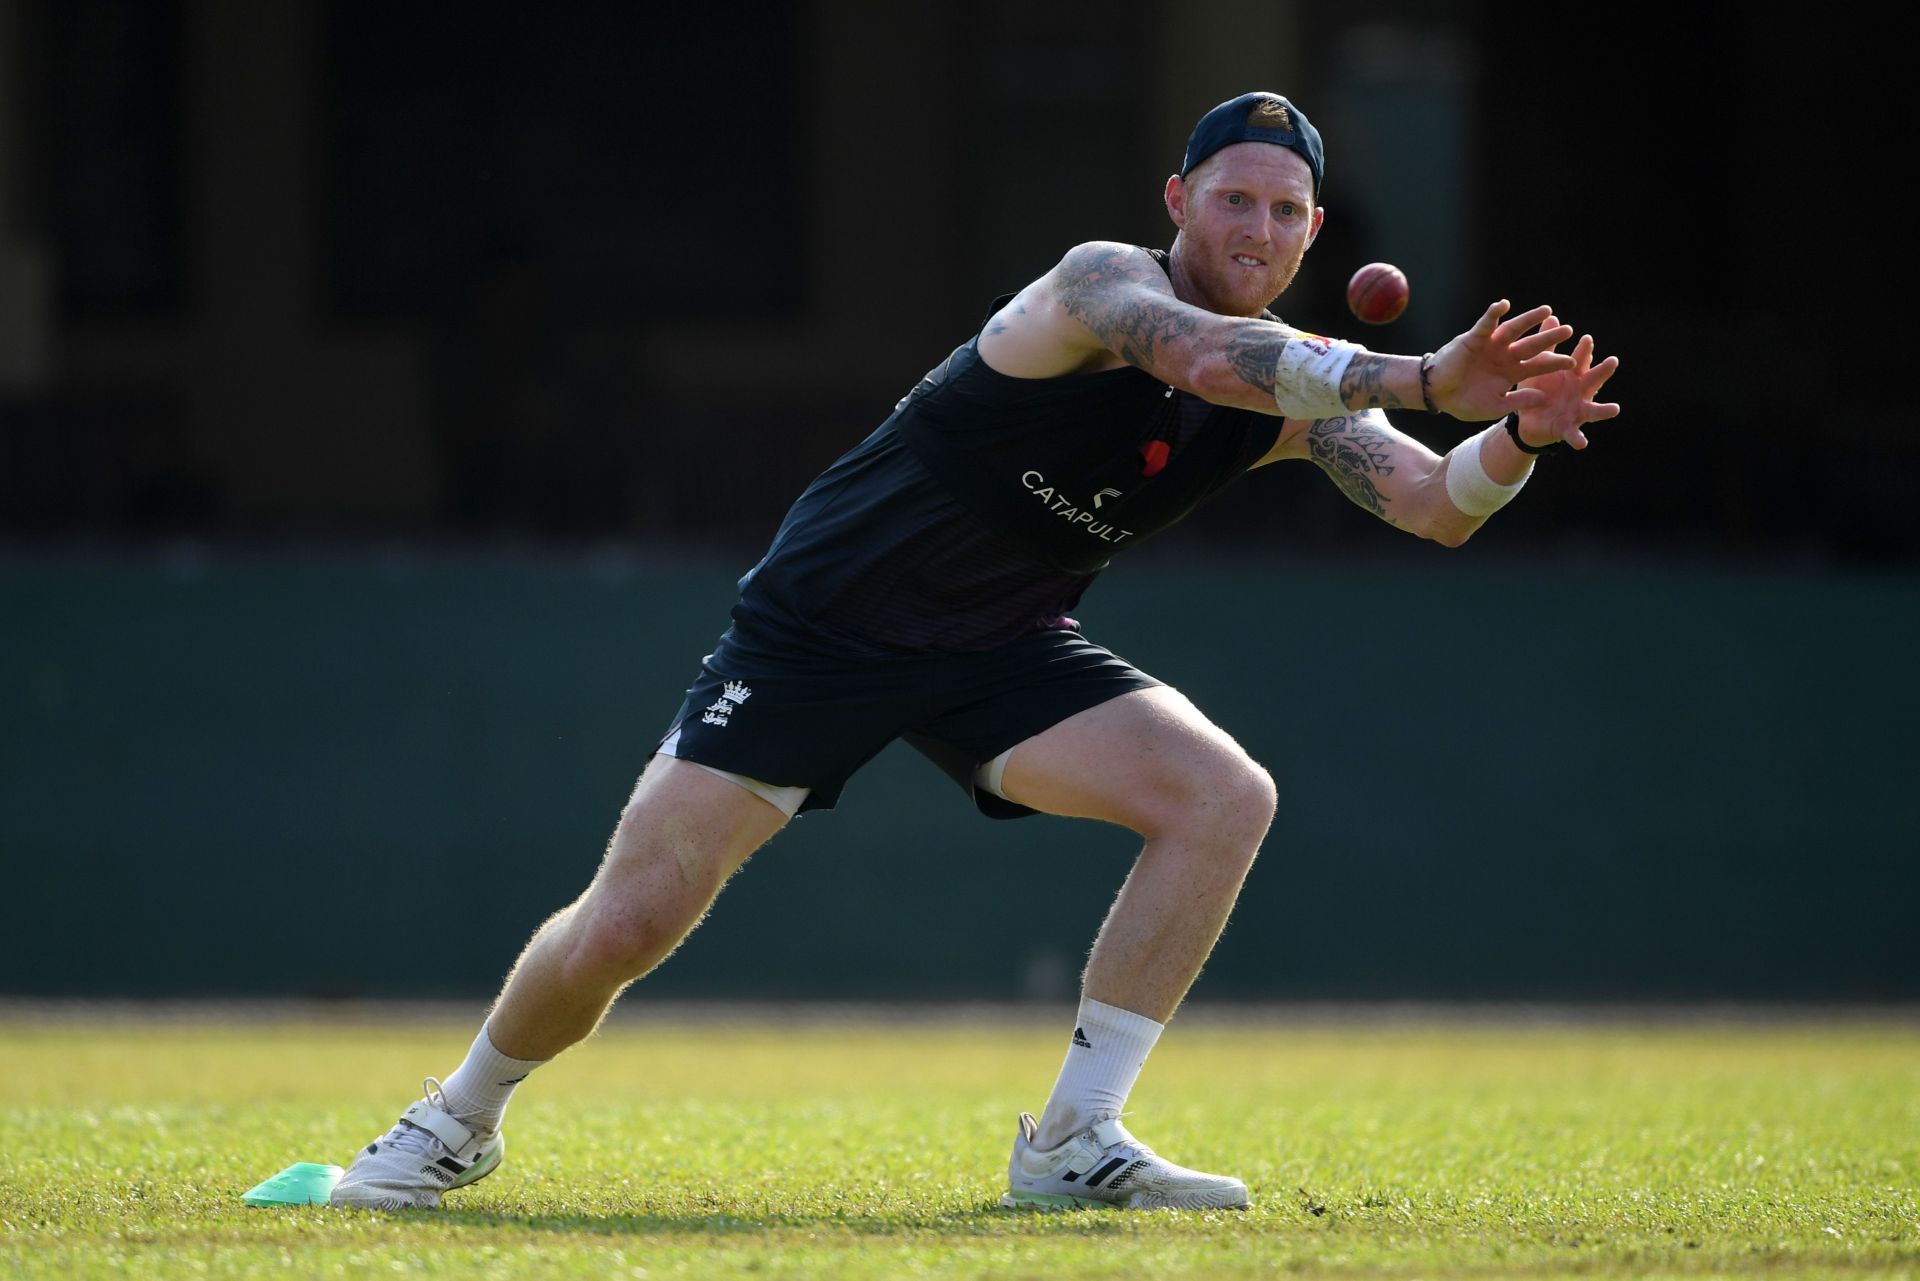 Ben Stokes has returned to the cricket field